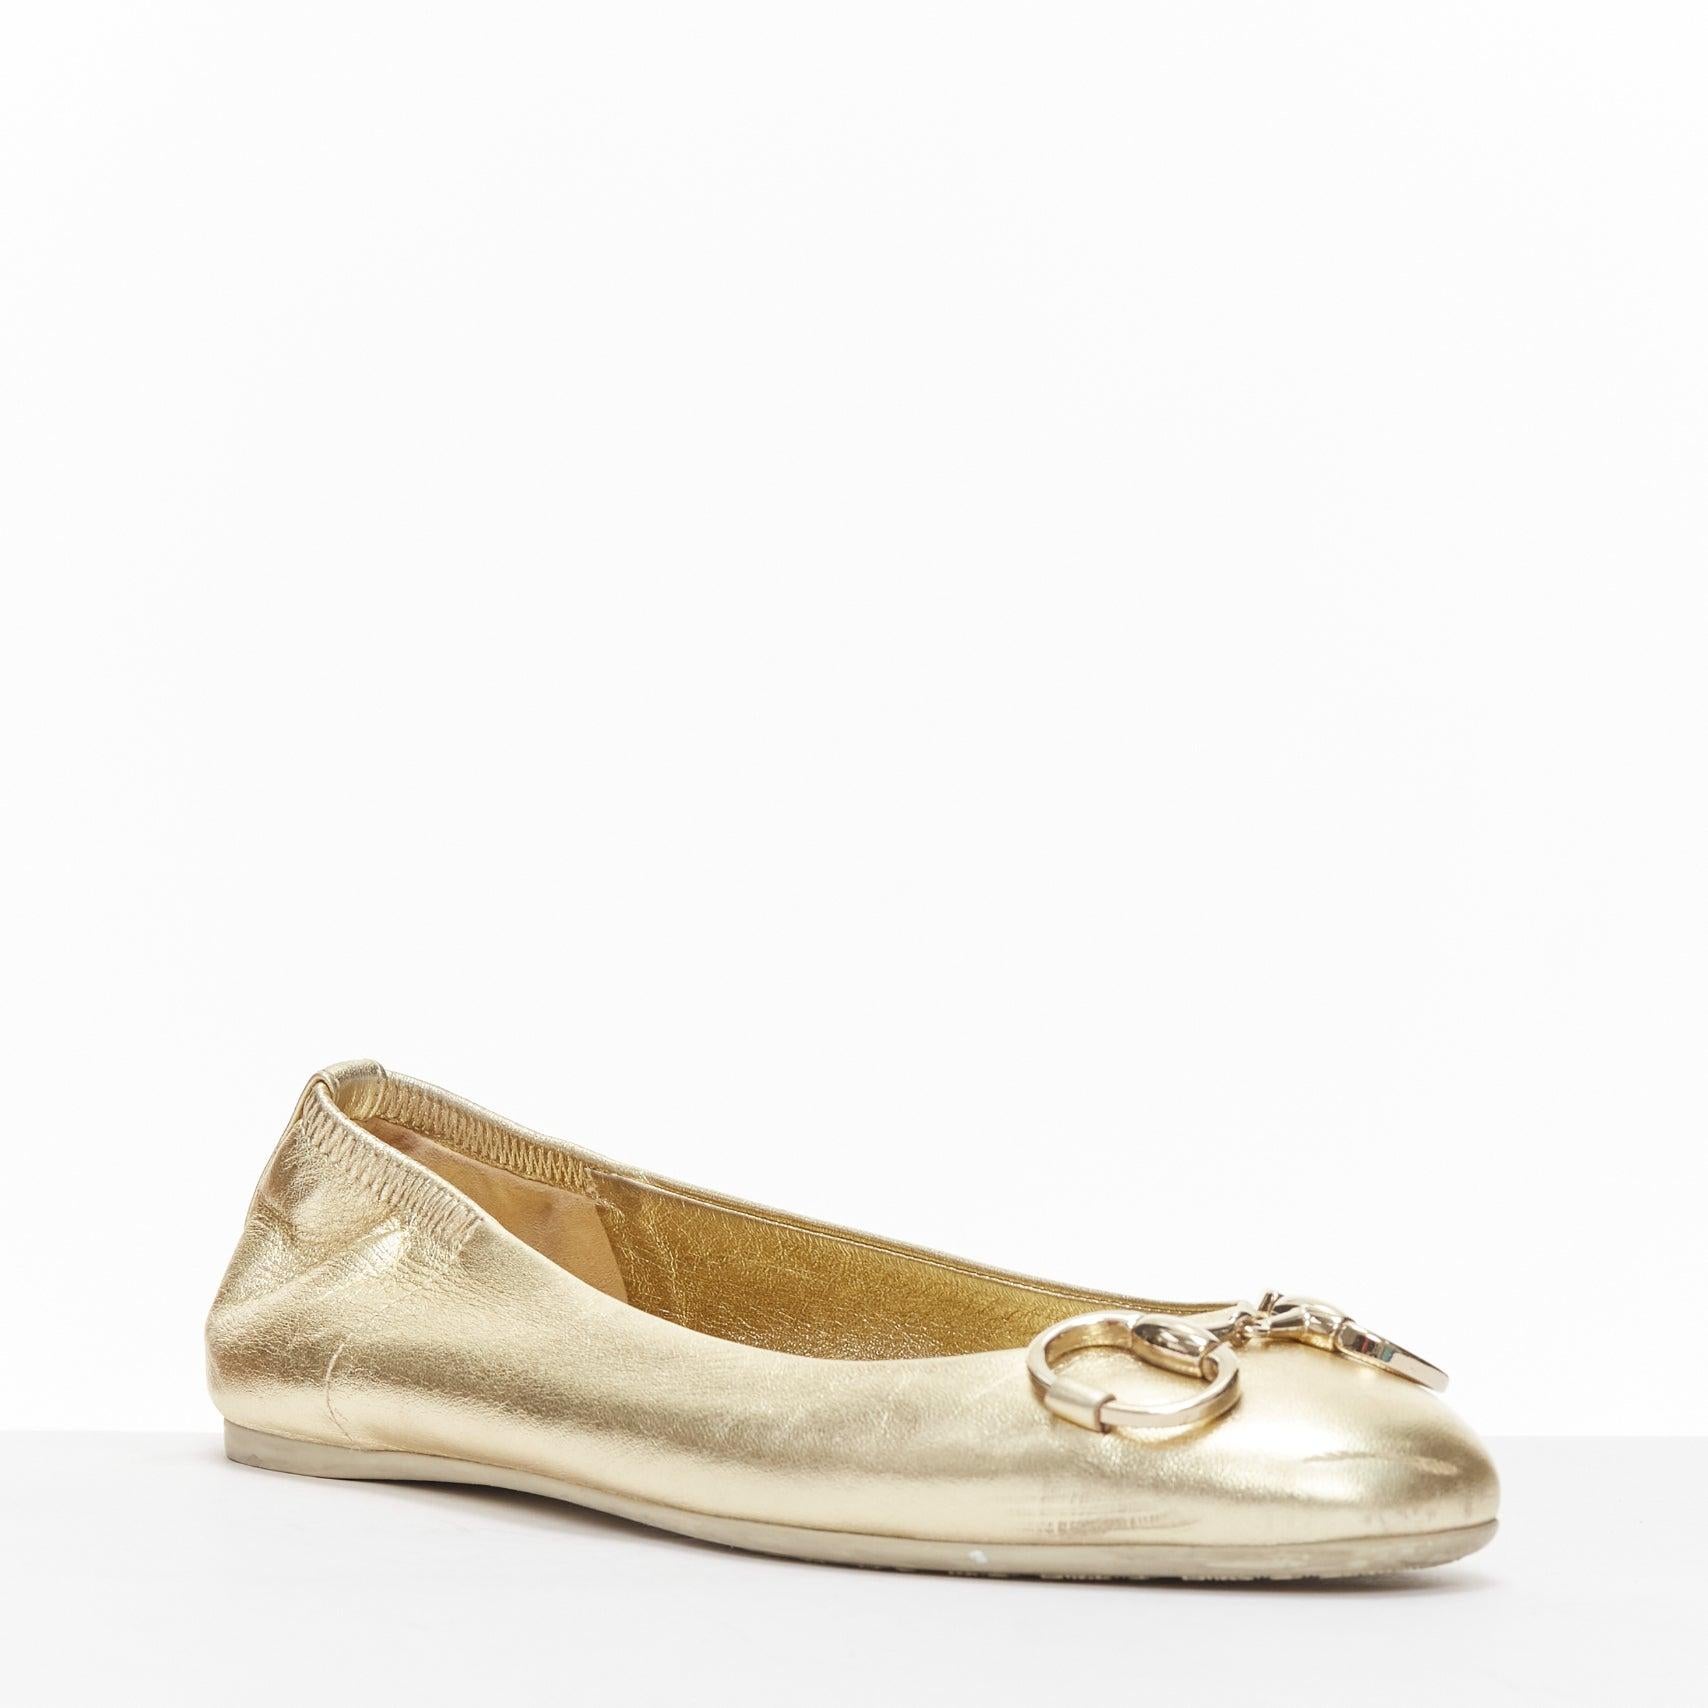 GUCCI metallic light gold Horsebit buckle round toe ballerina flats EU36
Reference: CELG/A00363
Brand: Gucci
Collection: Horsebit
Material: Leather
Color: Gold
Pattern: Solid
Lining: Gold Leather
Extra Details: Metallicc gold soft leather upper.